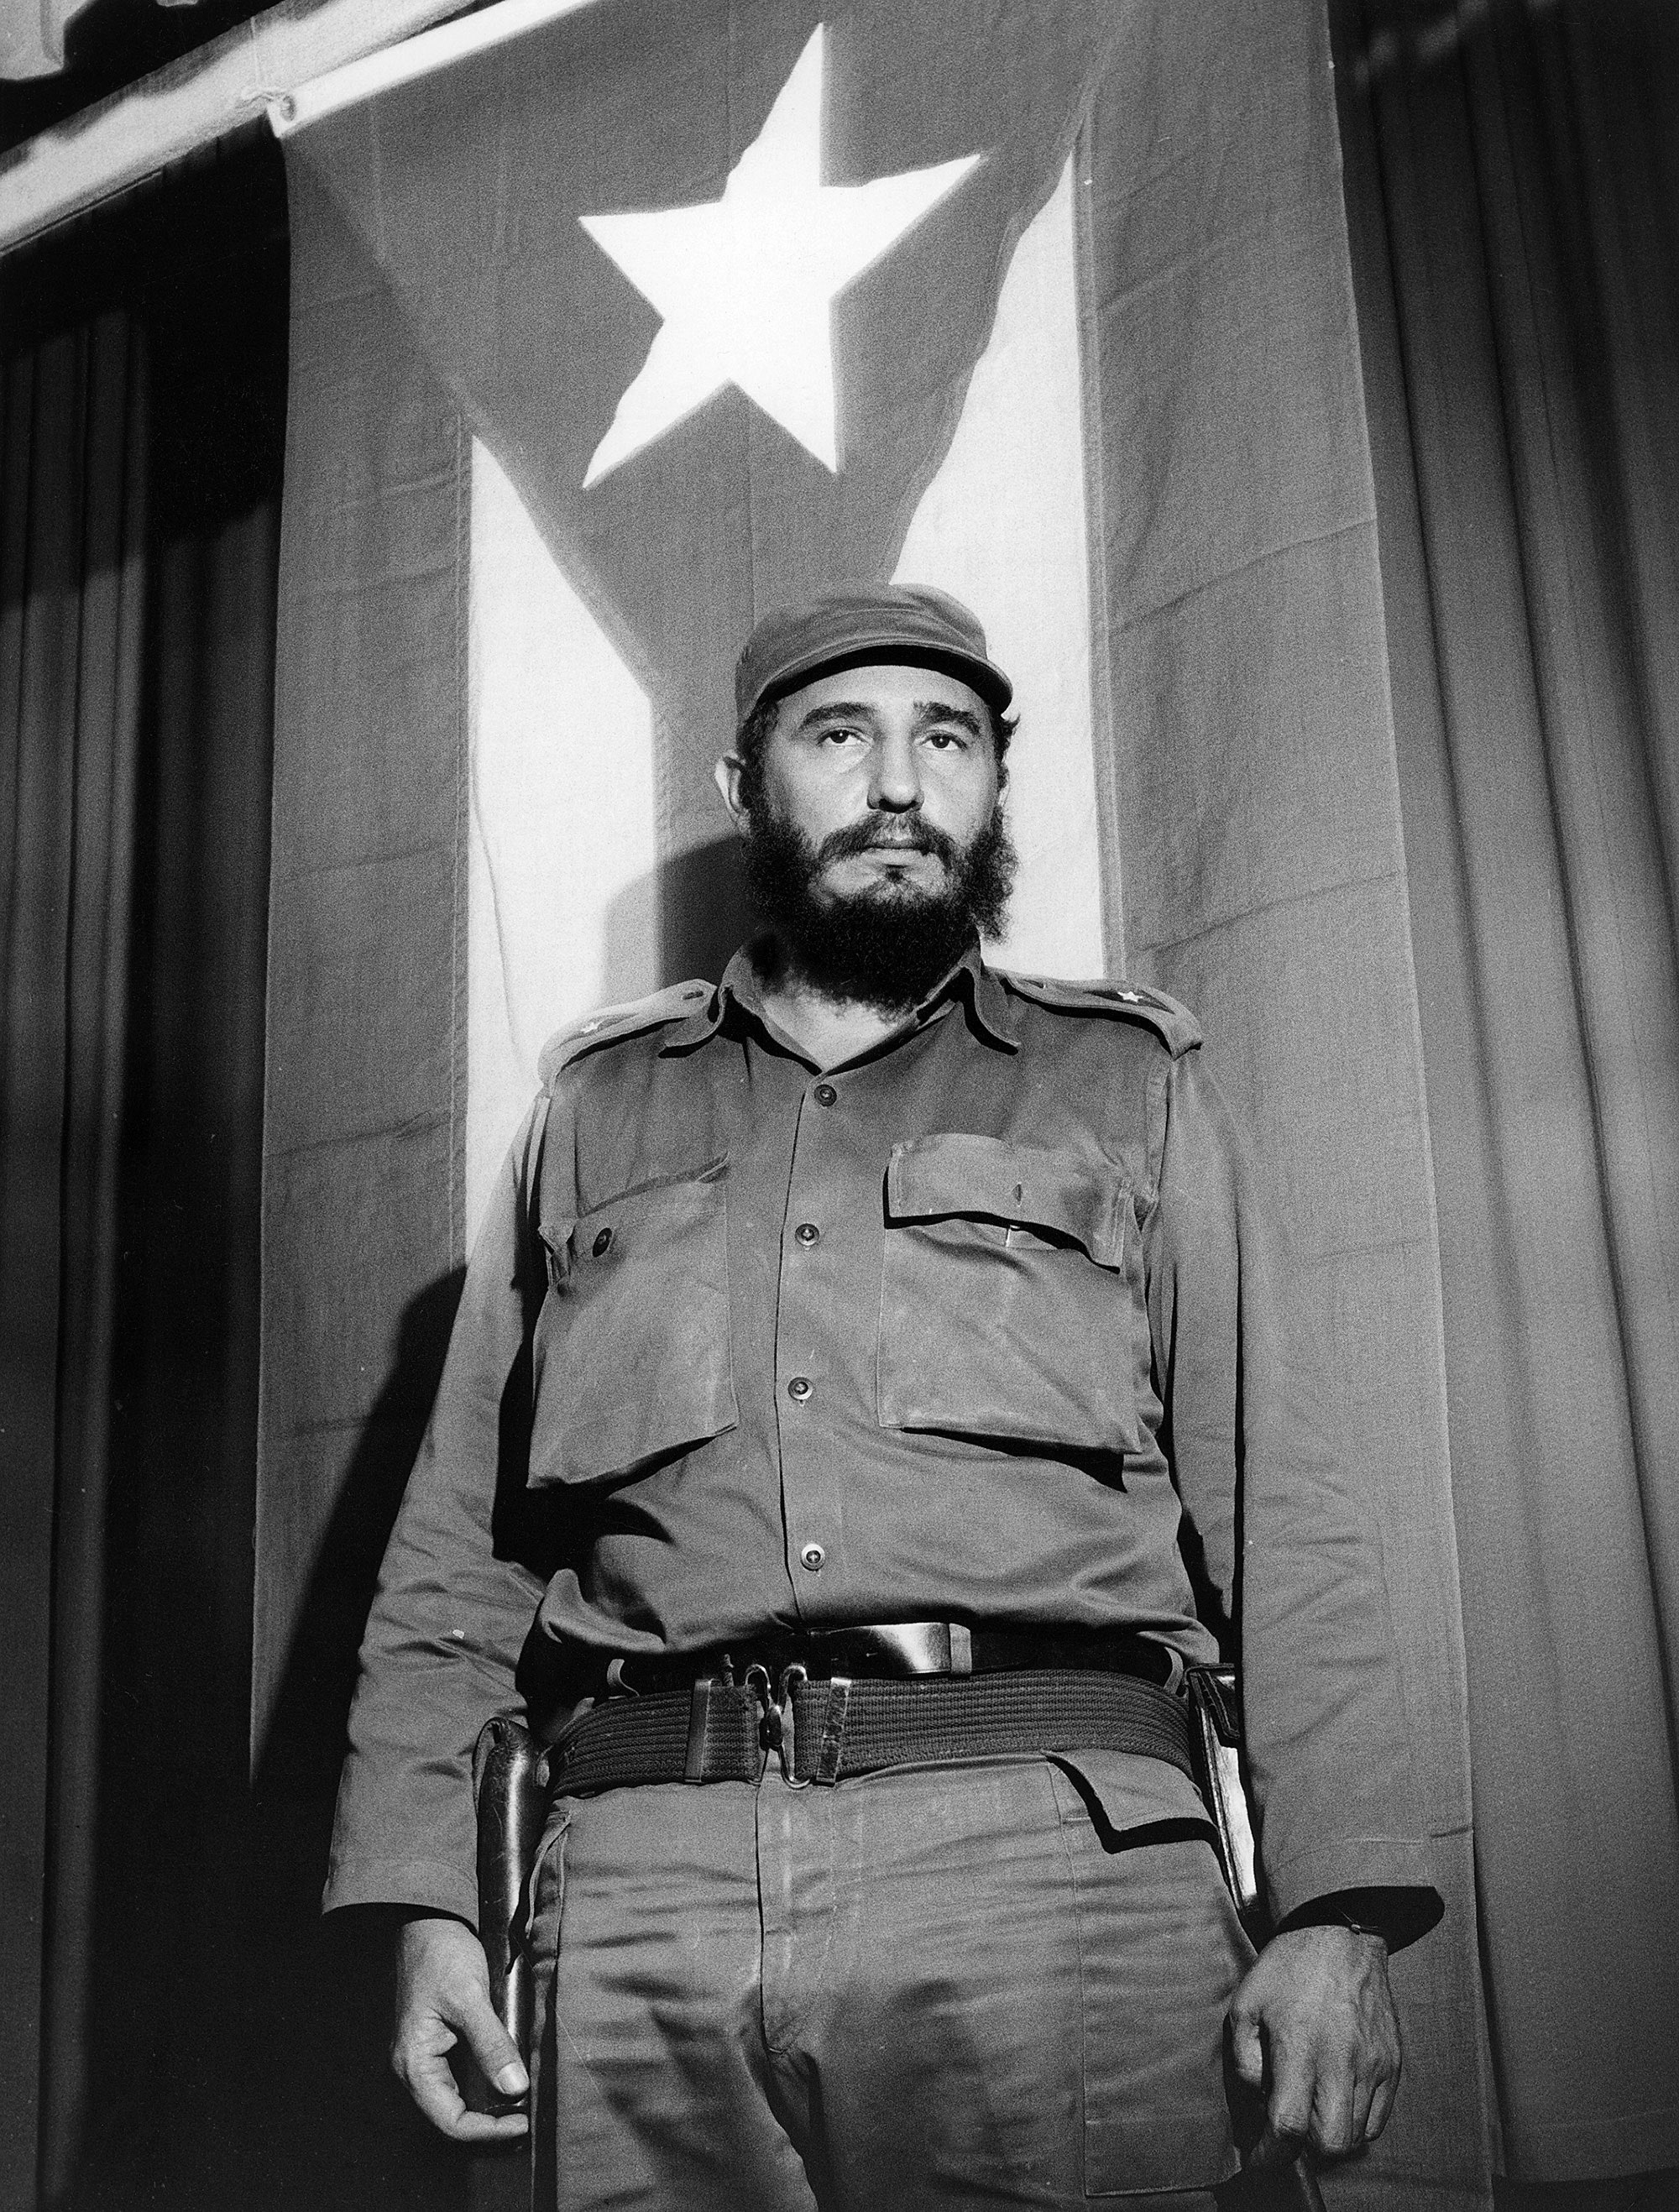 Fidel Castro and the mystery of his health status